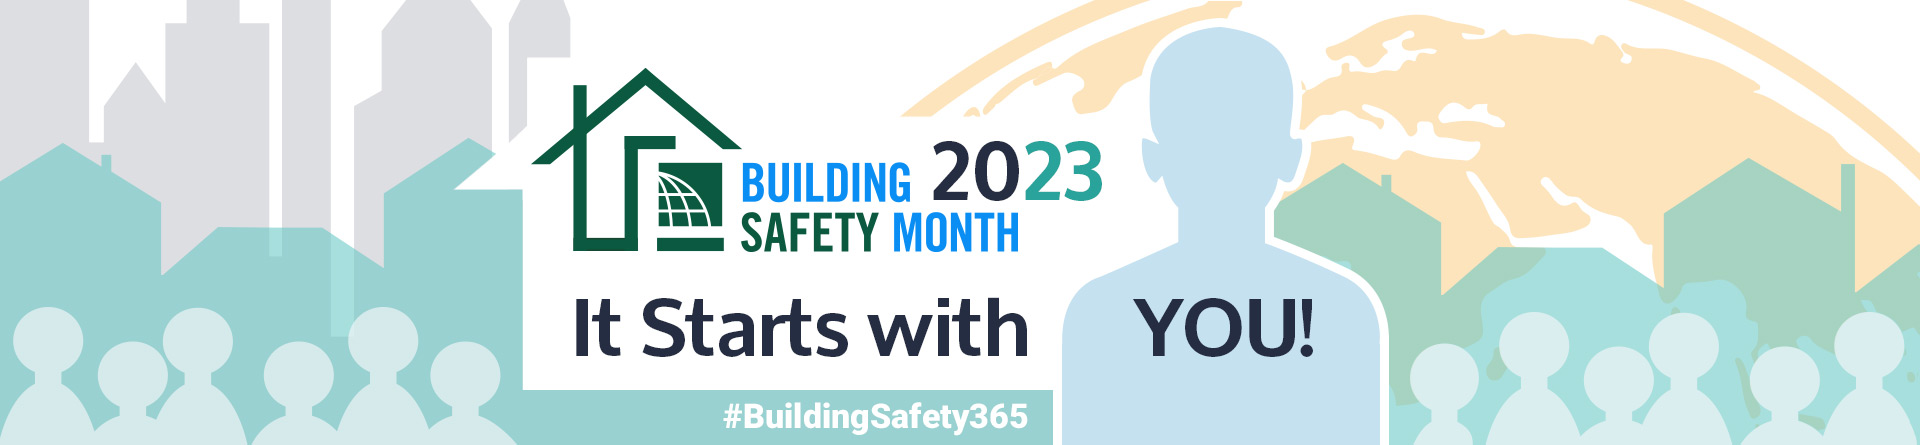 2023 Building Safety Month Proclamations